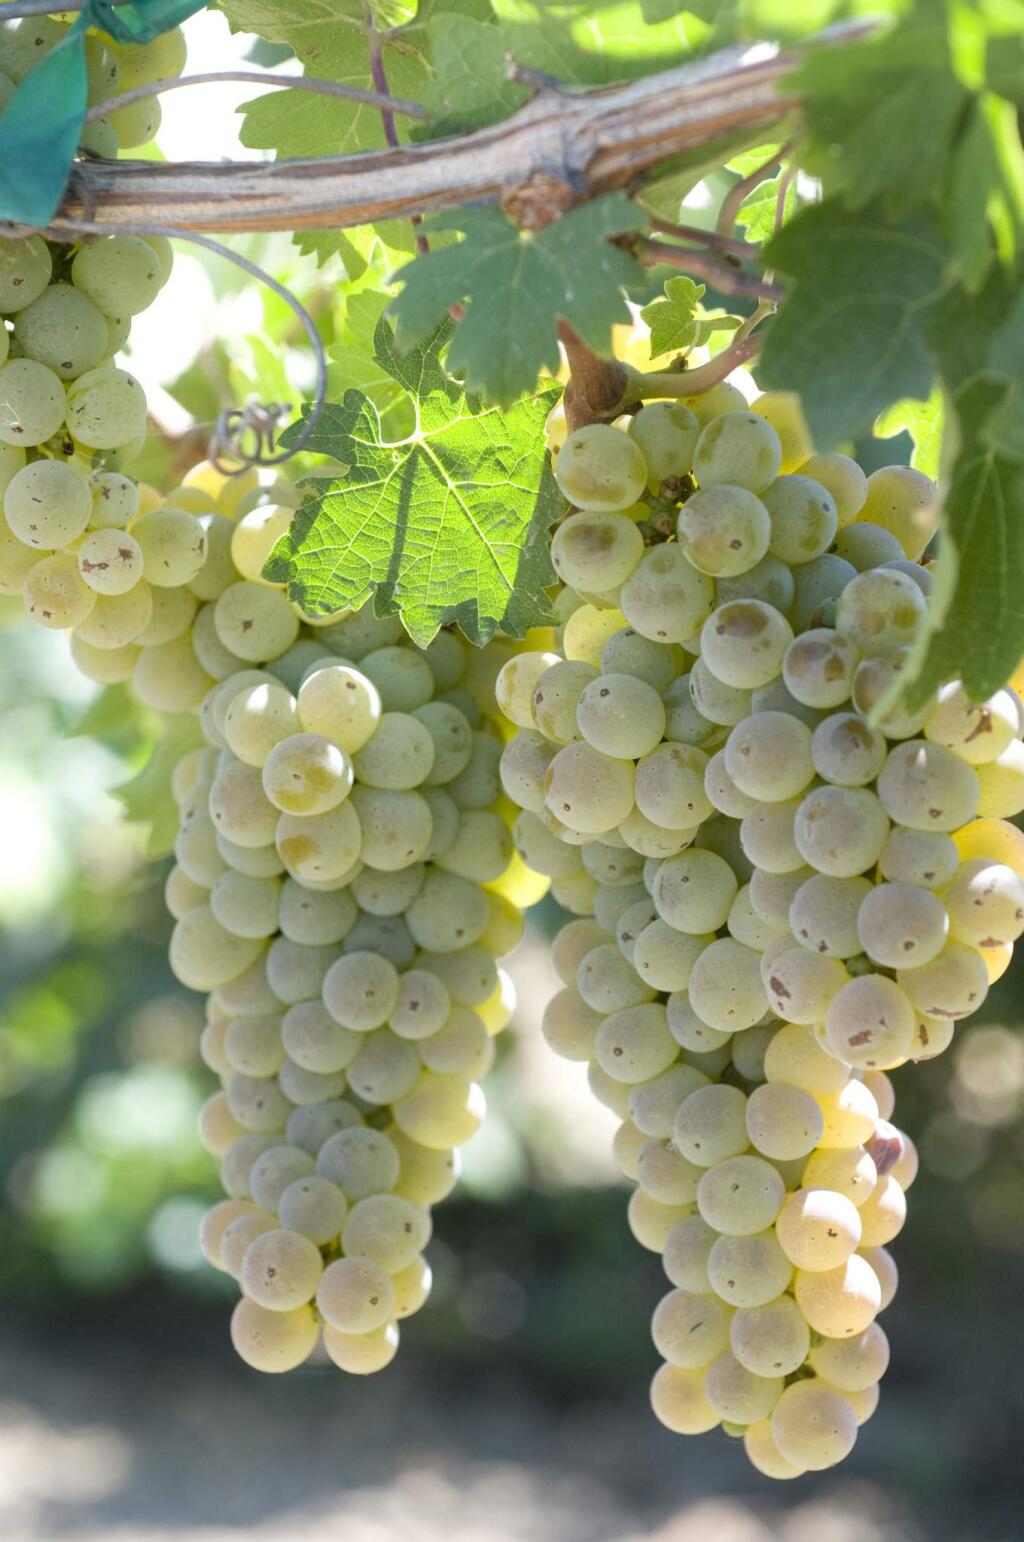 Caminante blanc, a Pierce's disease-resistant white grape variety released in late 2019, has characteristics of both sauvignon blanc and chardonnay, key grapes grown in Lake and Sonoma counties, respectively, for vintners. (photo by Dan Ng / University of California, Davis)